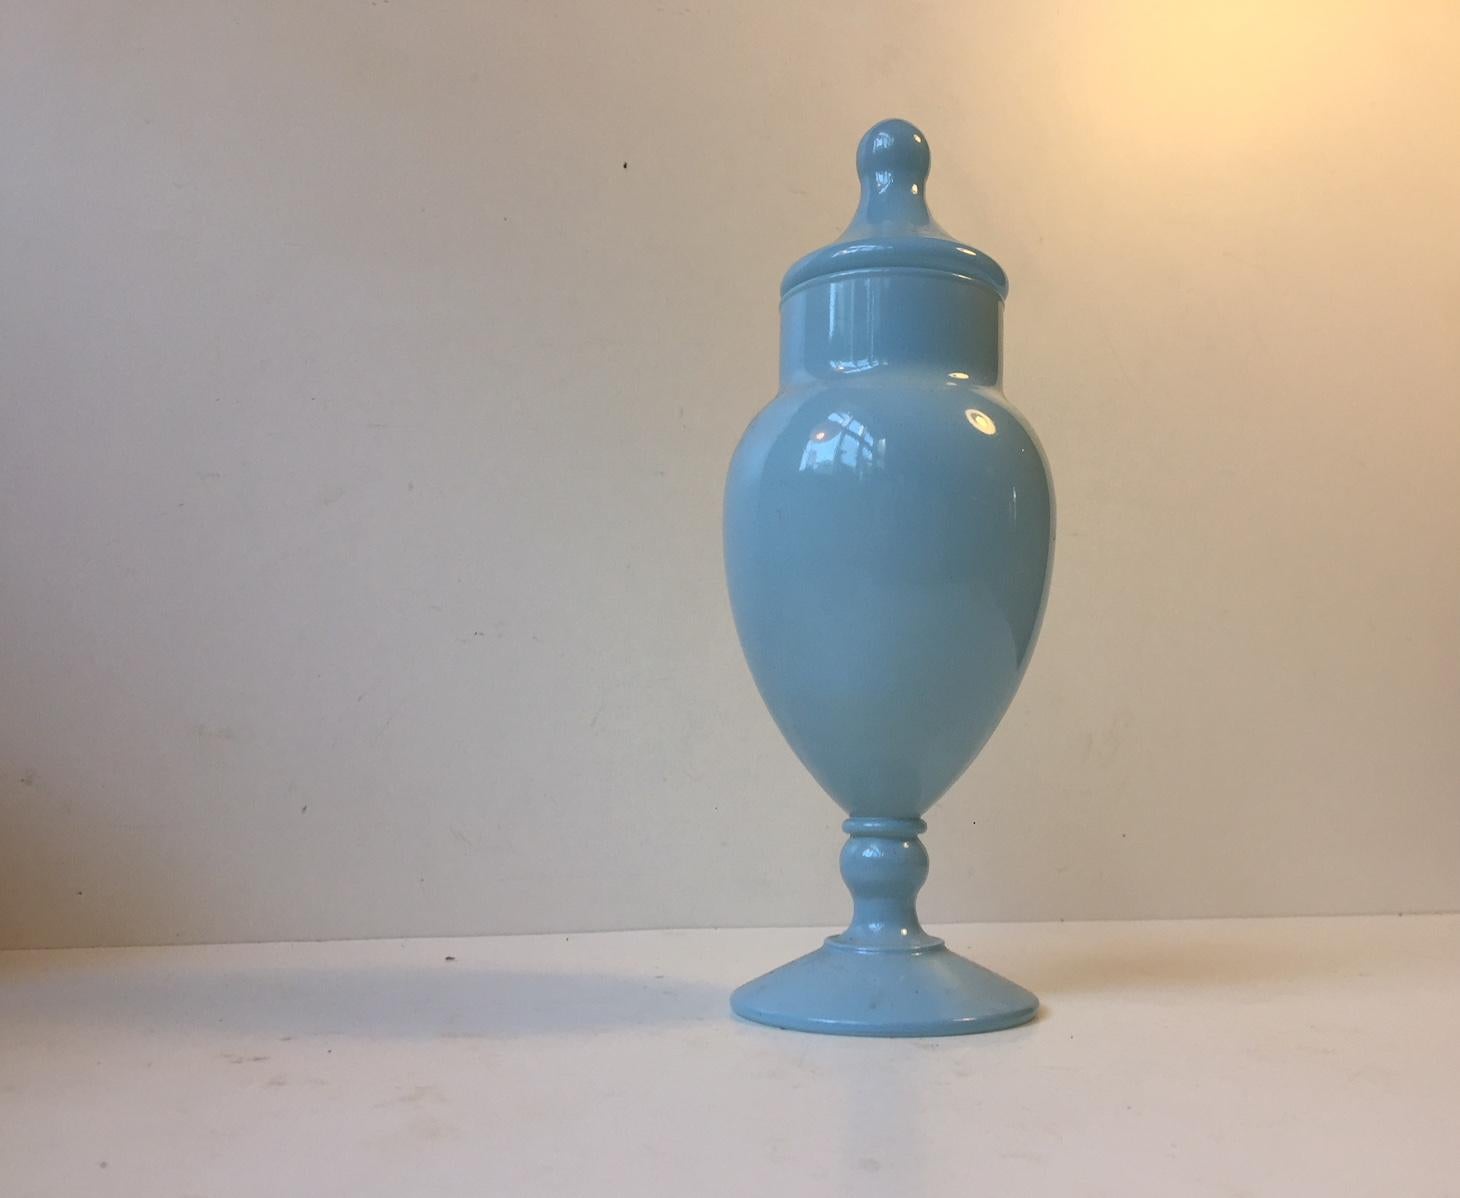 This light blue mouth blown urn or lidded vase was designed by Cenedese Vetri of Murano, Italy. It was designed and manufactured during the mid-late 1960s.